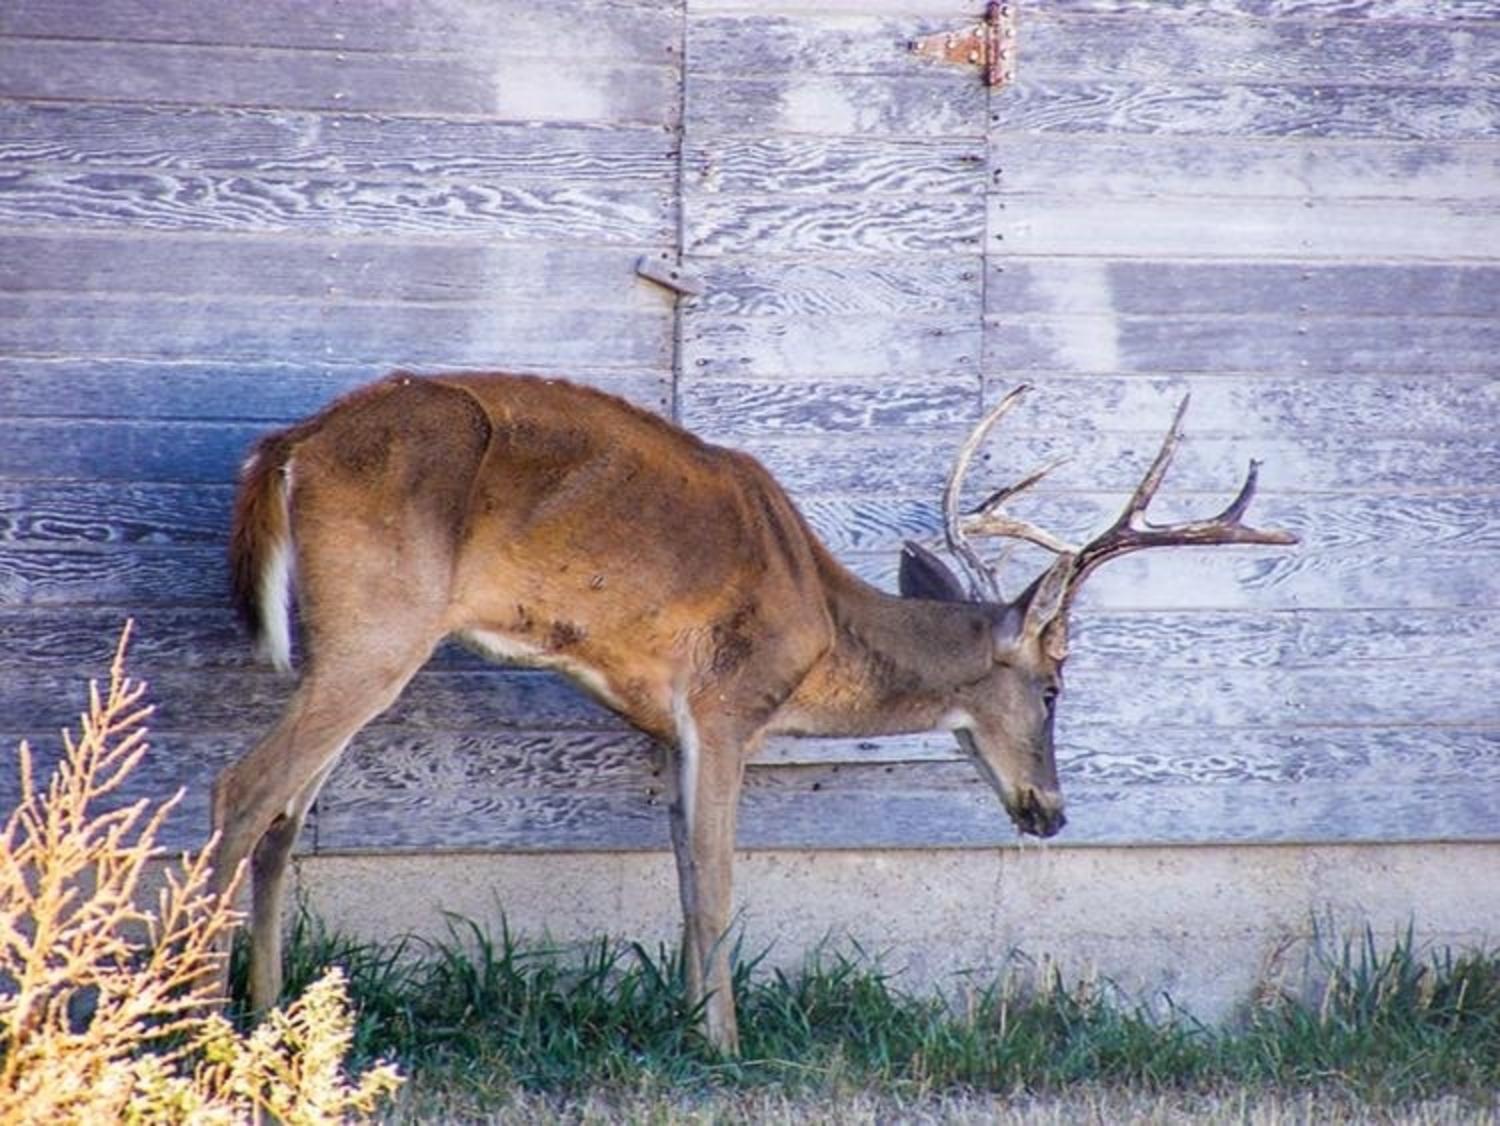 A mule deer buck, similar to this whitetail infected with Chronic Wasting Disease, was confirmed to be afflicted with the deadly malady in Grand Teton National Park after it died in a car accident and was tested.  Photo courtesy Kansas Department of Wildlife, Parks and Tourism/Mike Hopper